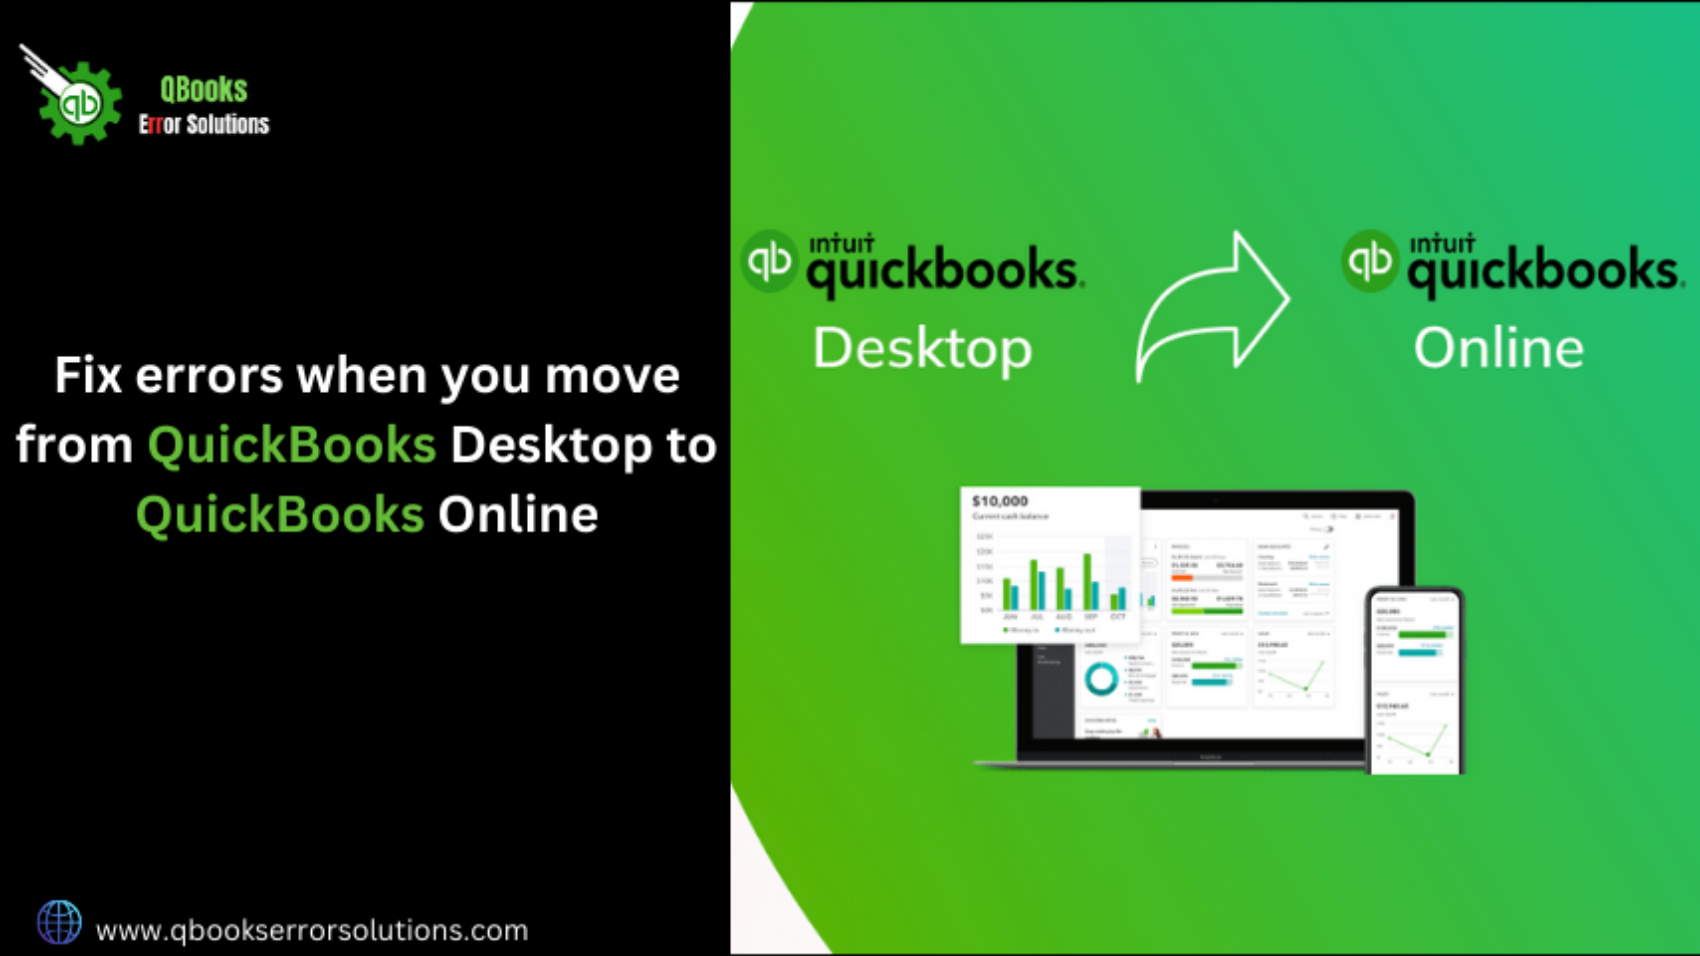 Fix errors when you move from QuickBooks Desktop to QuickBooks Online